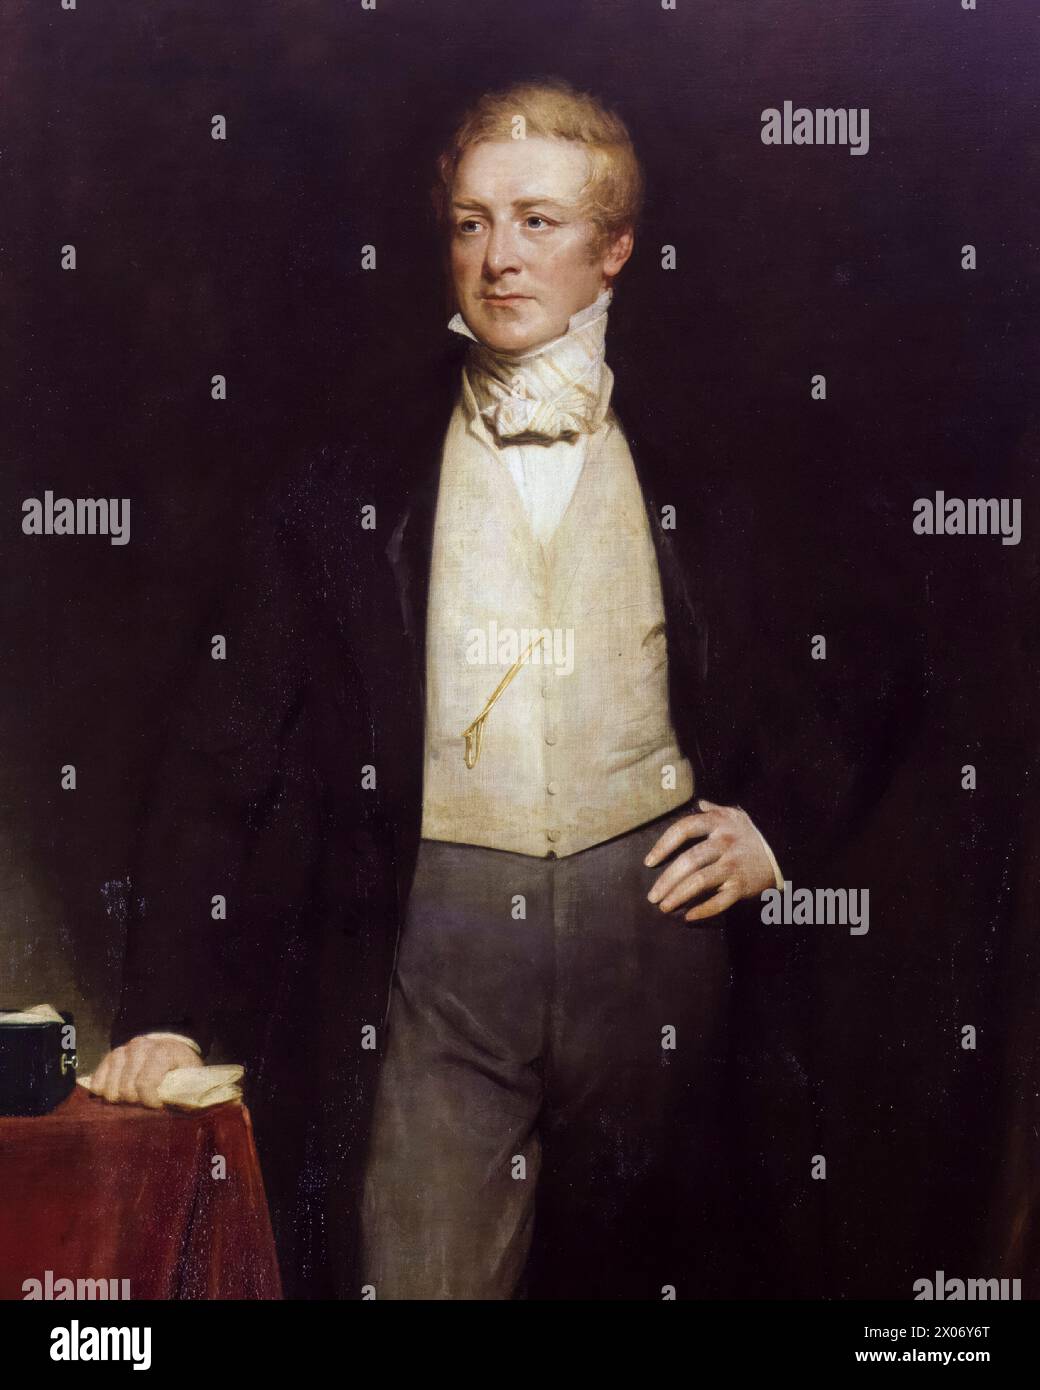 Sir Robert Peel (1788-1850), 2nd Baronet, twice Prime Minister of the United Kingdom, 1834-1835 and 1841-1846, portrait painting in oil on canvas by Henry William Pickersgill, before 1875 Stock Photo